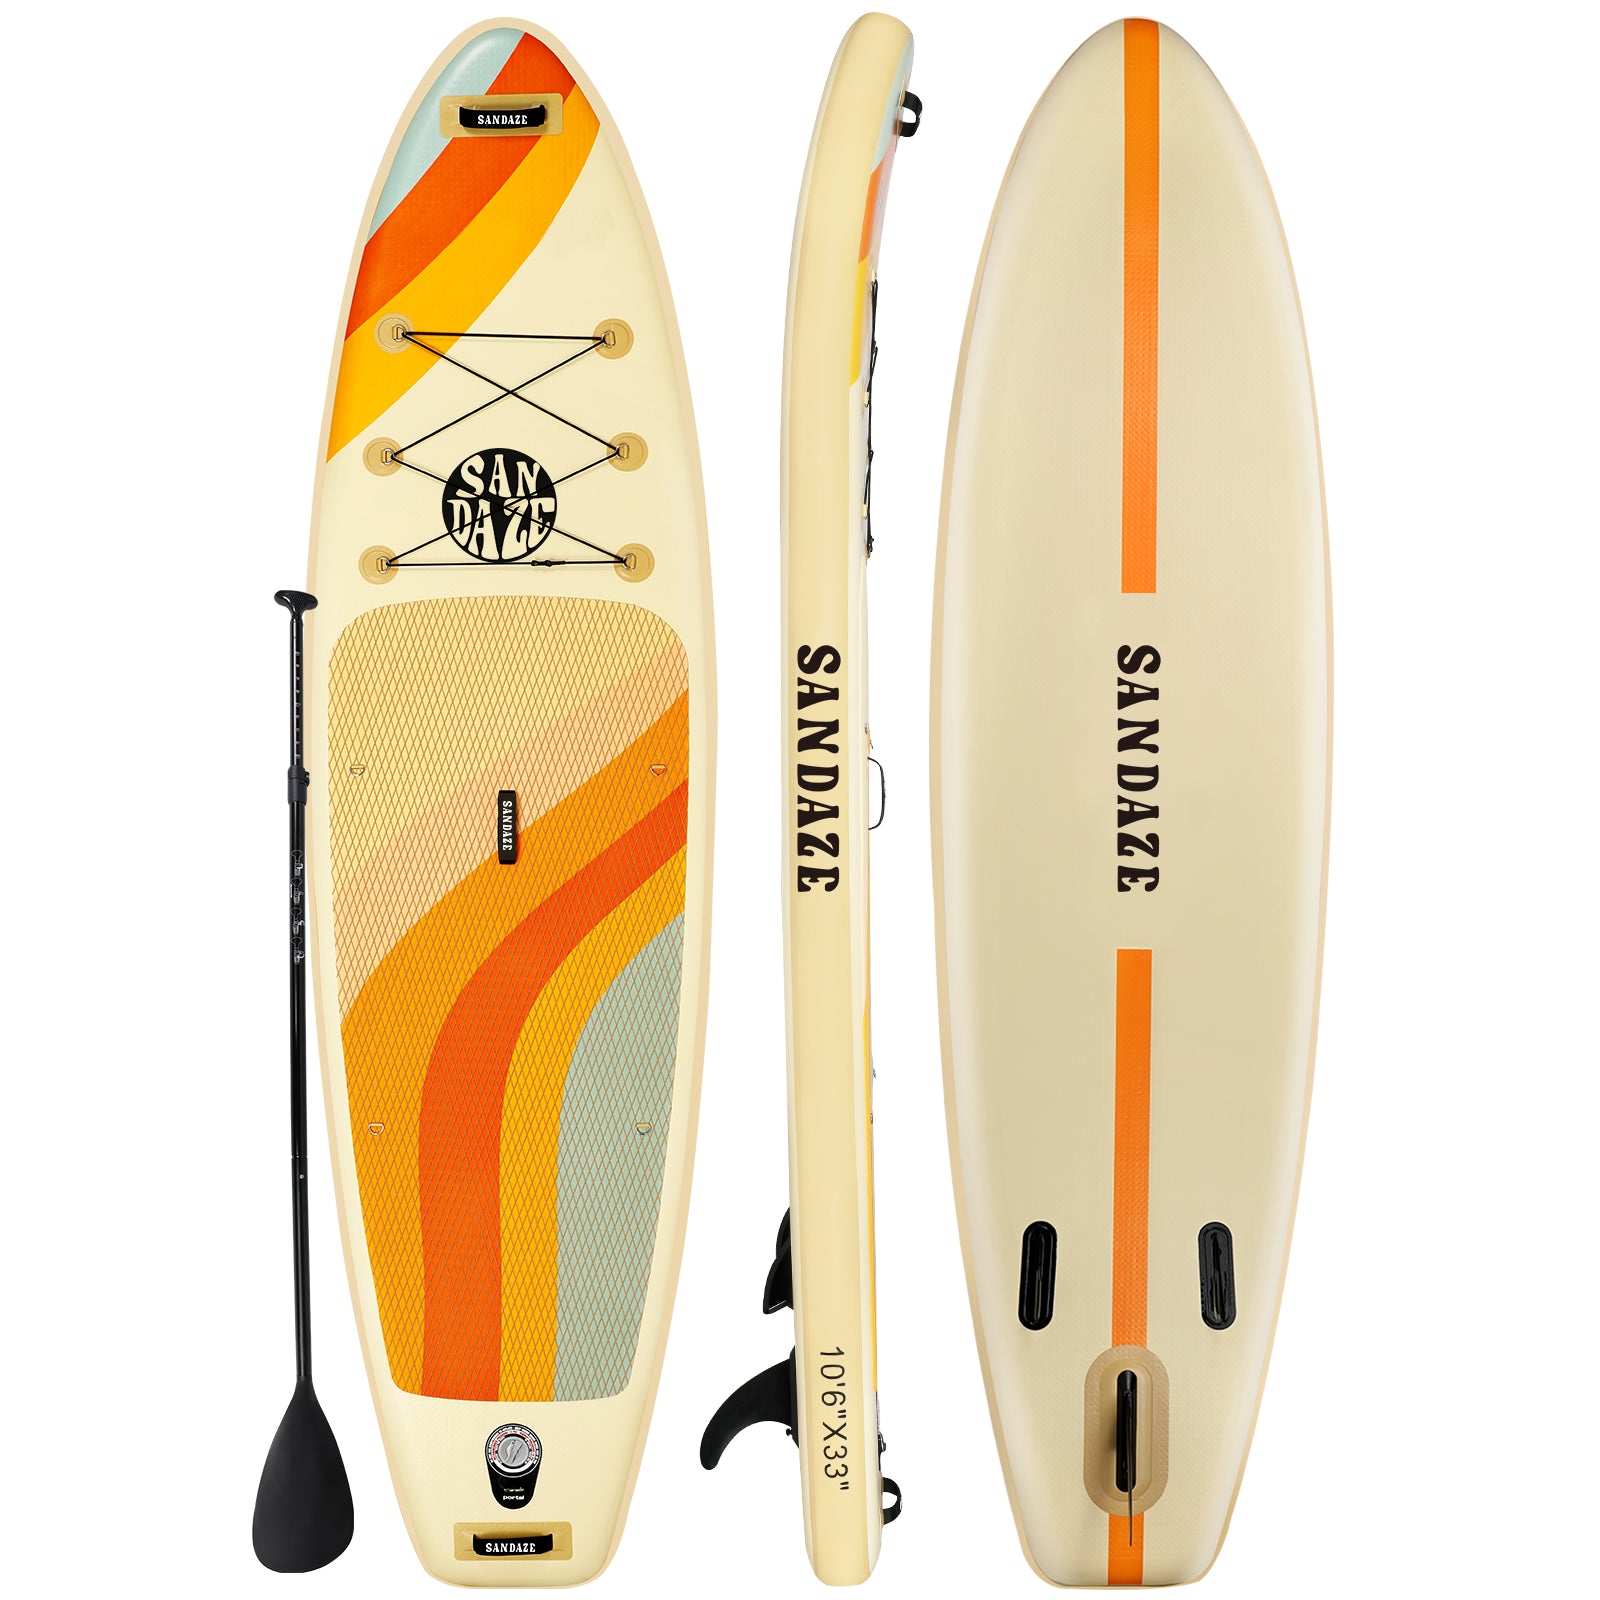 SANDAZE Inflatable Stand Up Paddle Board